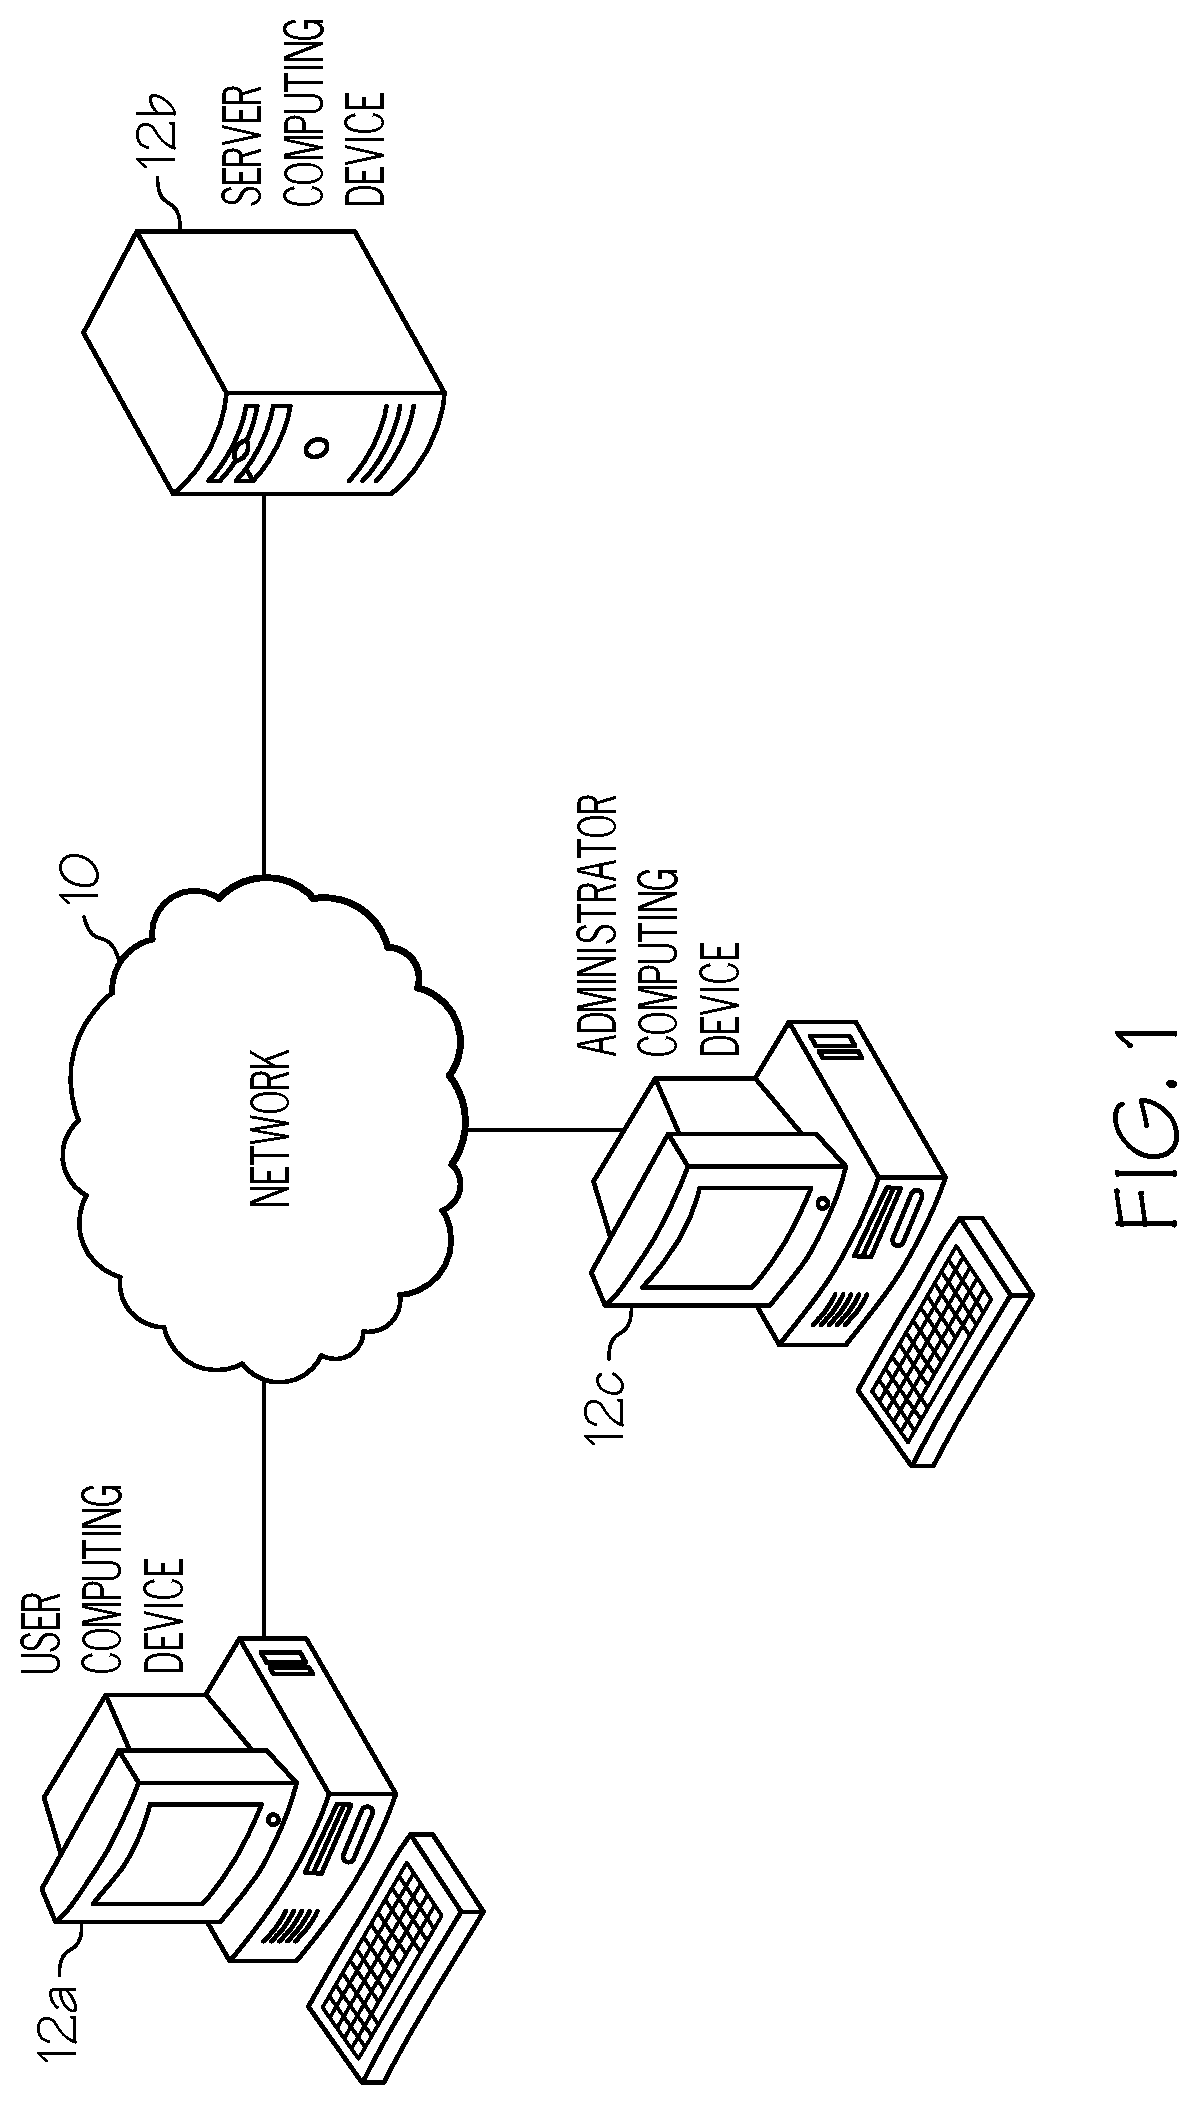 Systems and methods for informative graphical search